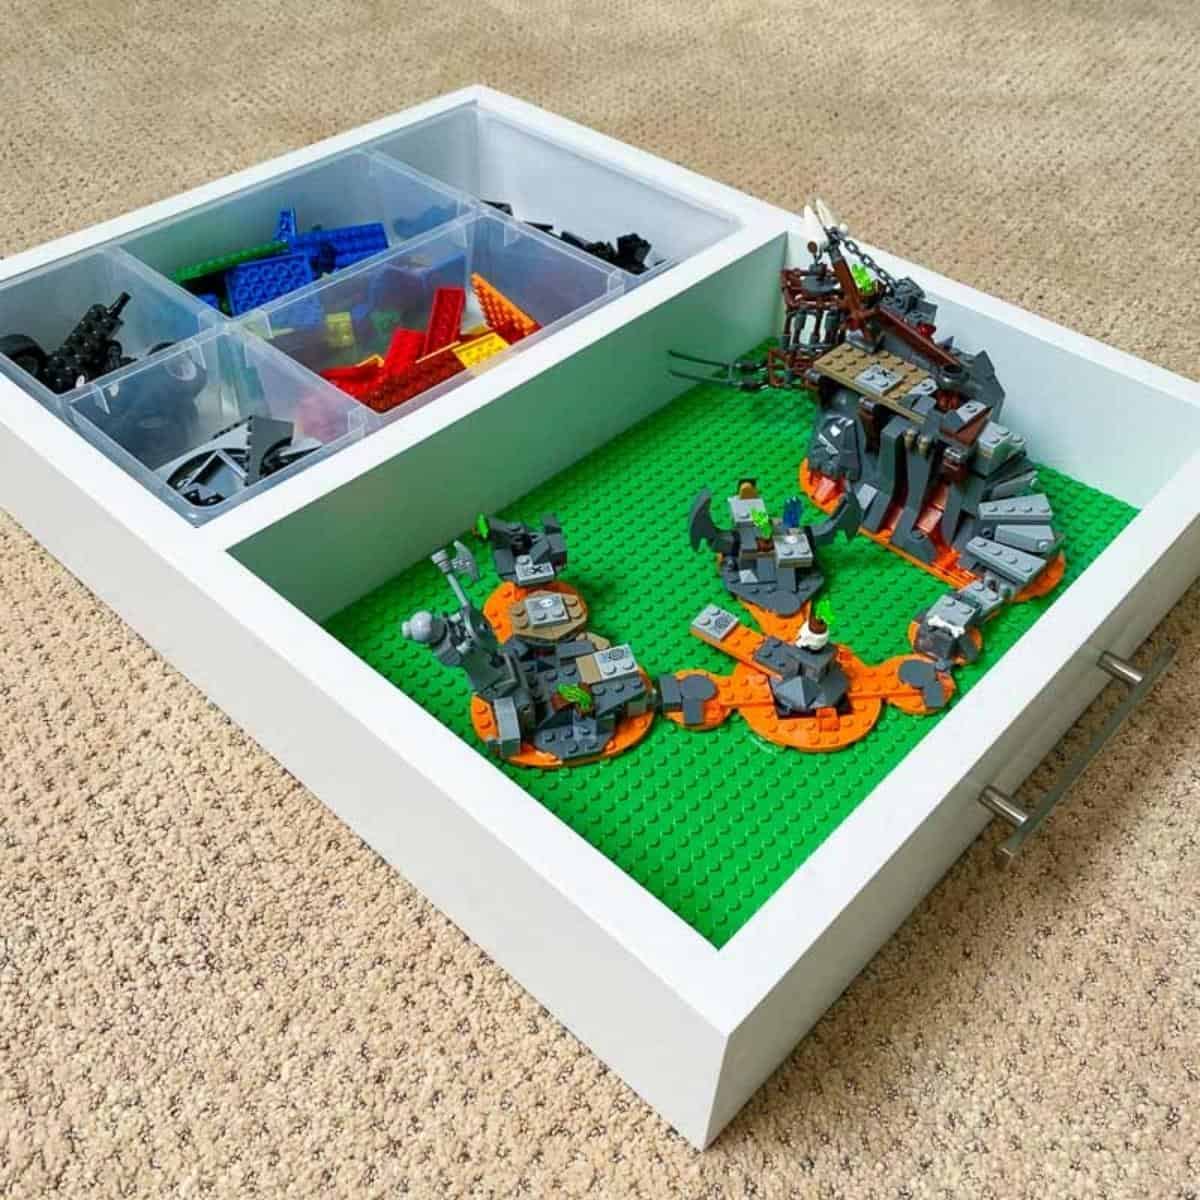 LEGO Sorting Box to Go Travel Case Organizing Dividers Green